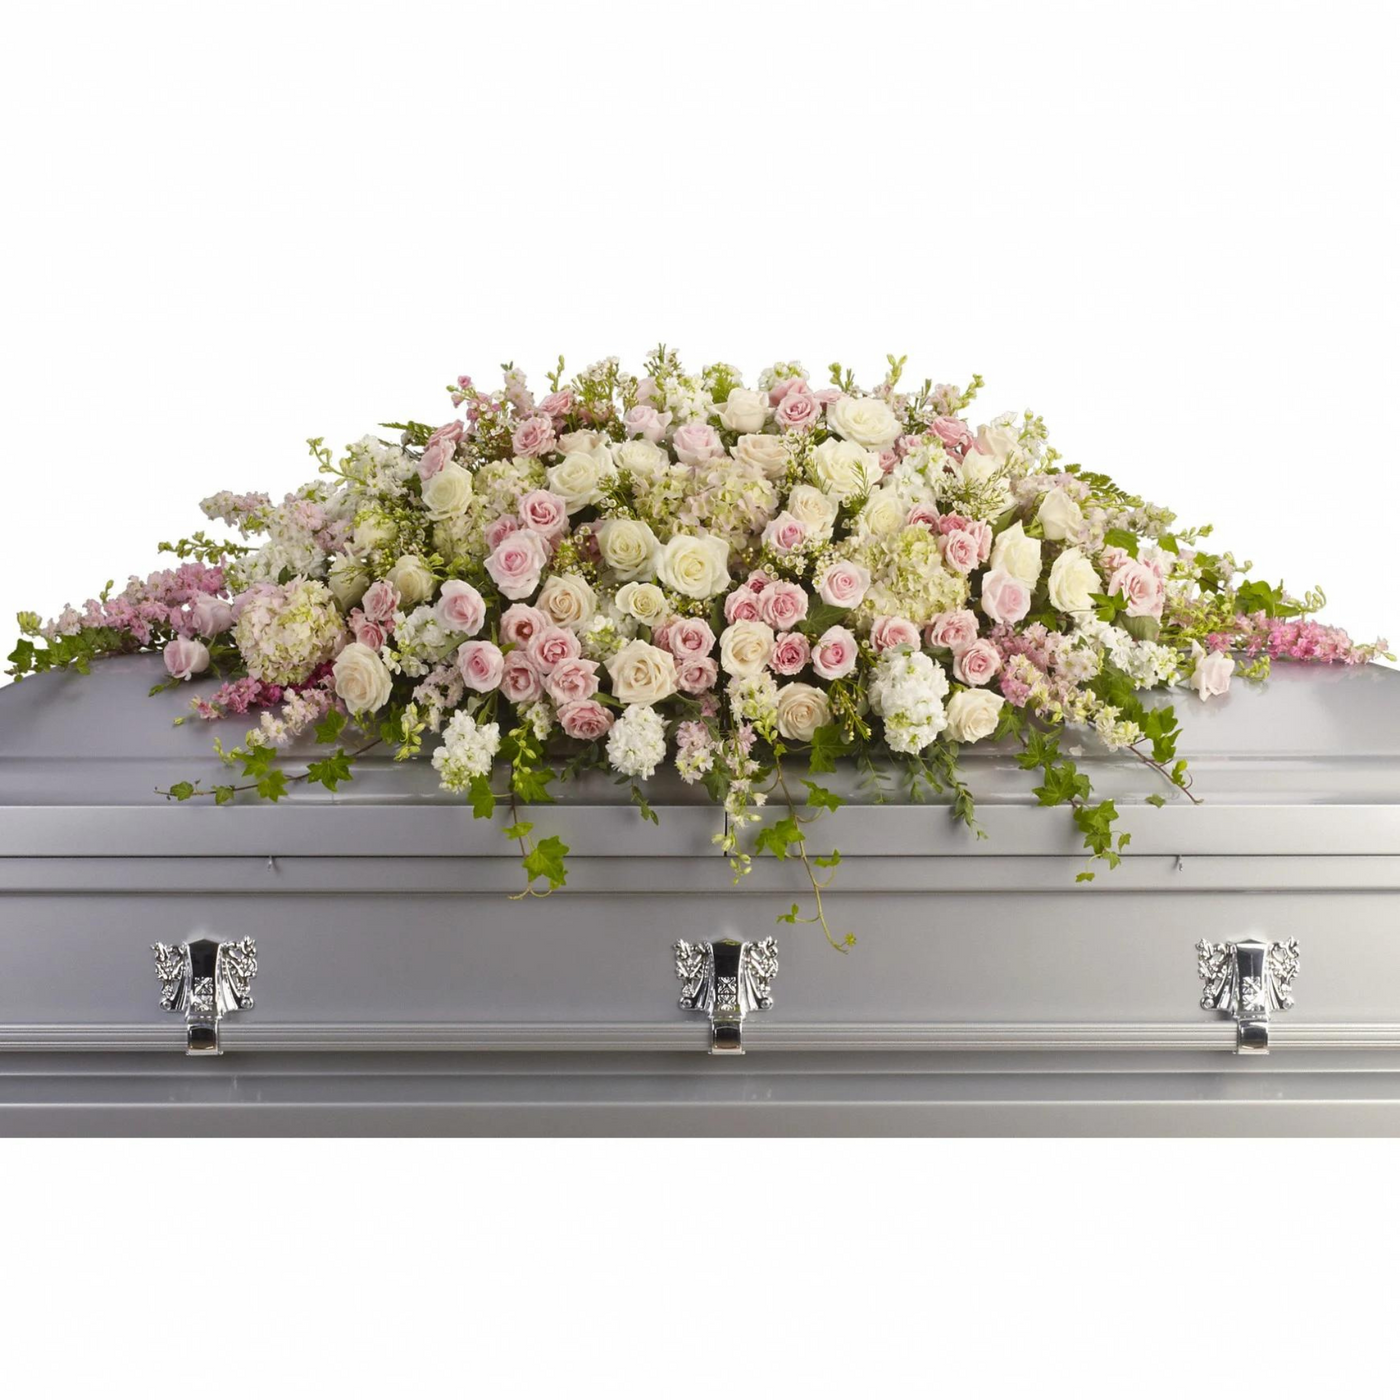 Peaceful White & Pink Casket Funeral Flowers